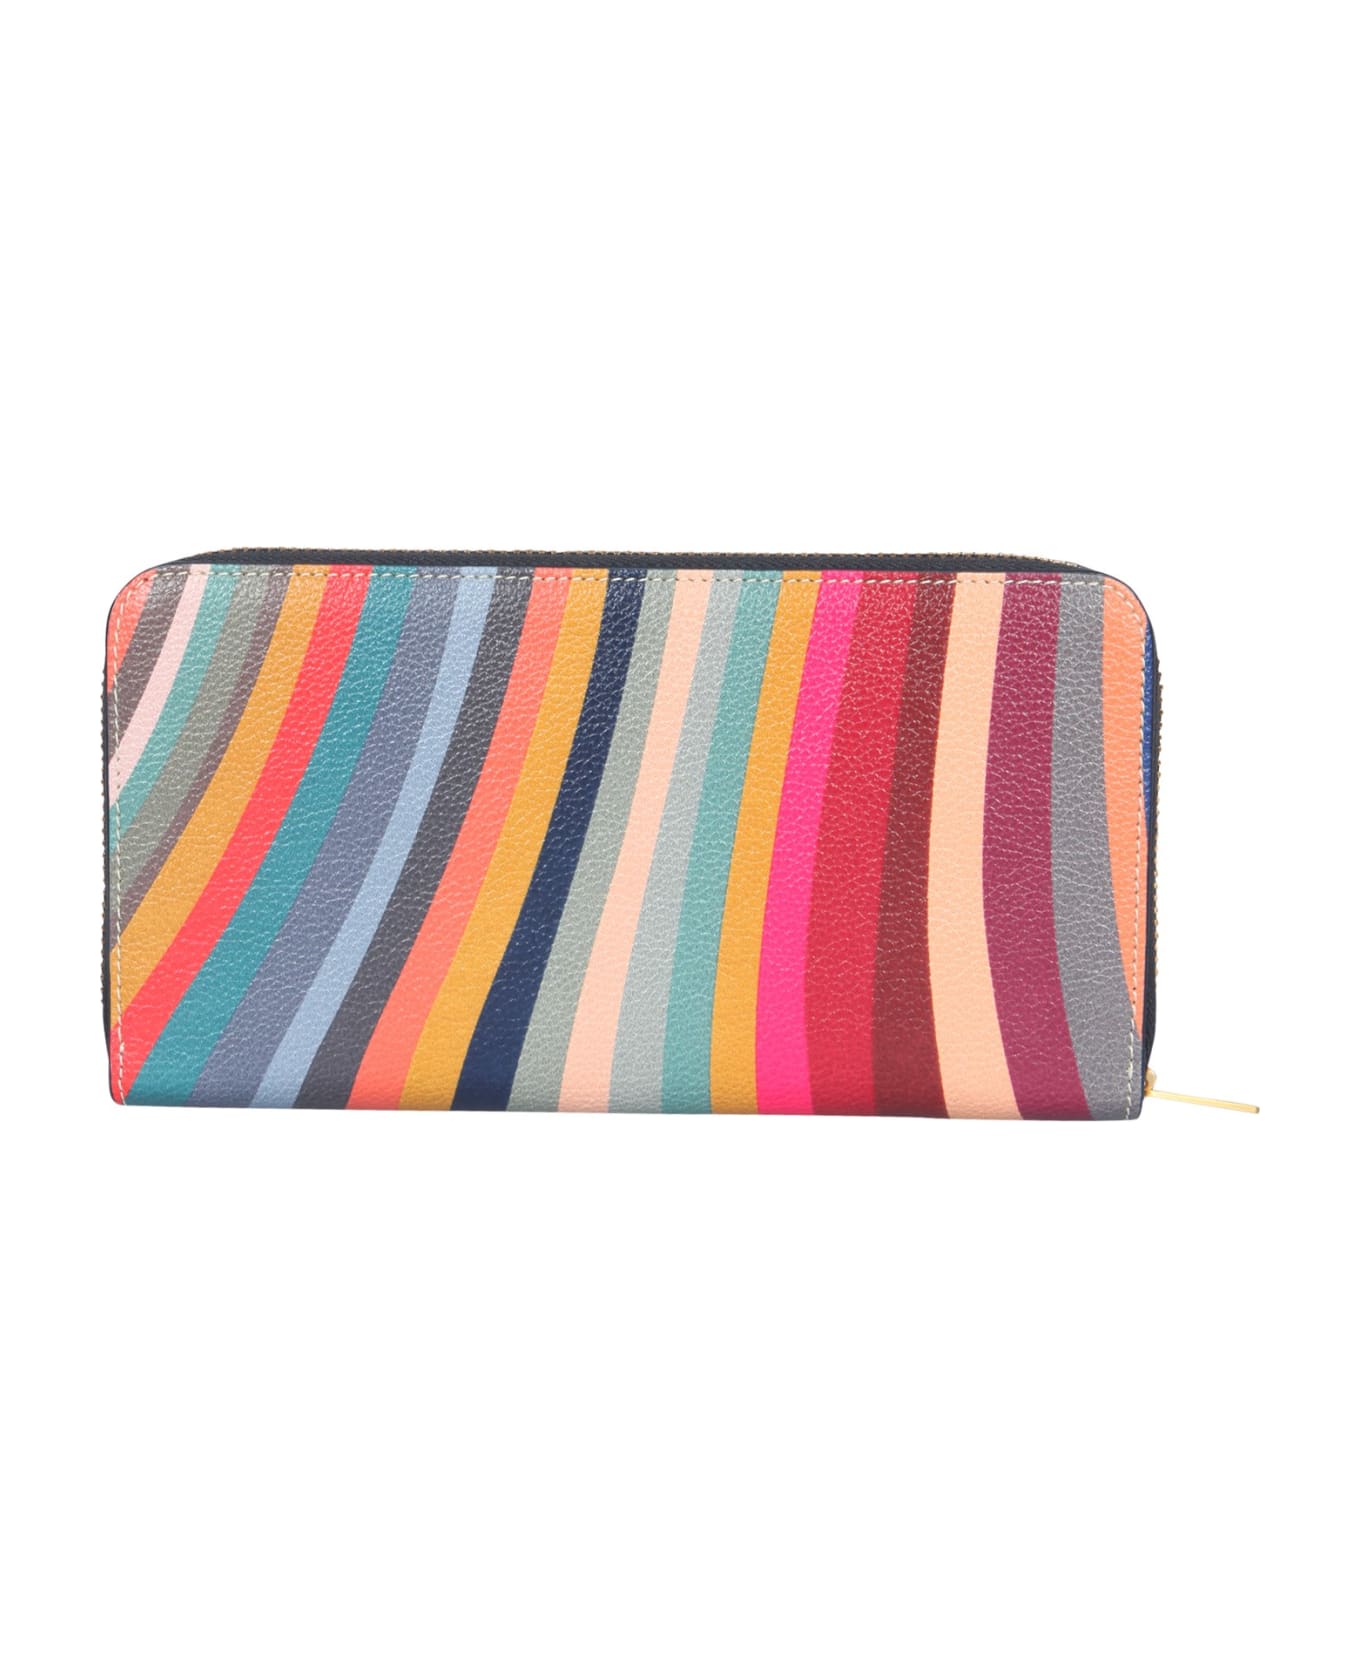 Paul Smith Large Wallet With Zip - Multicolor